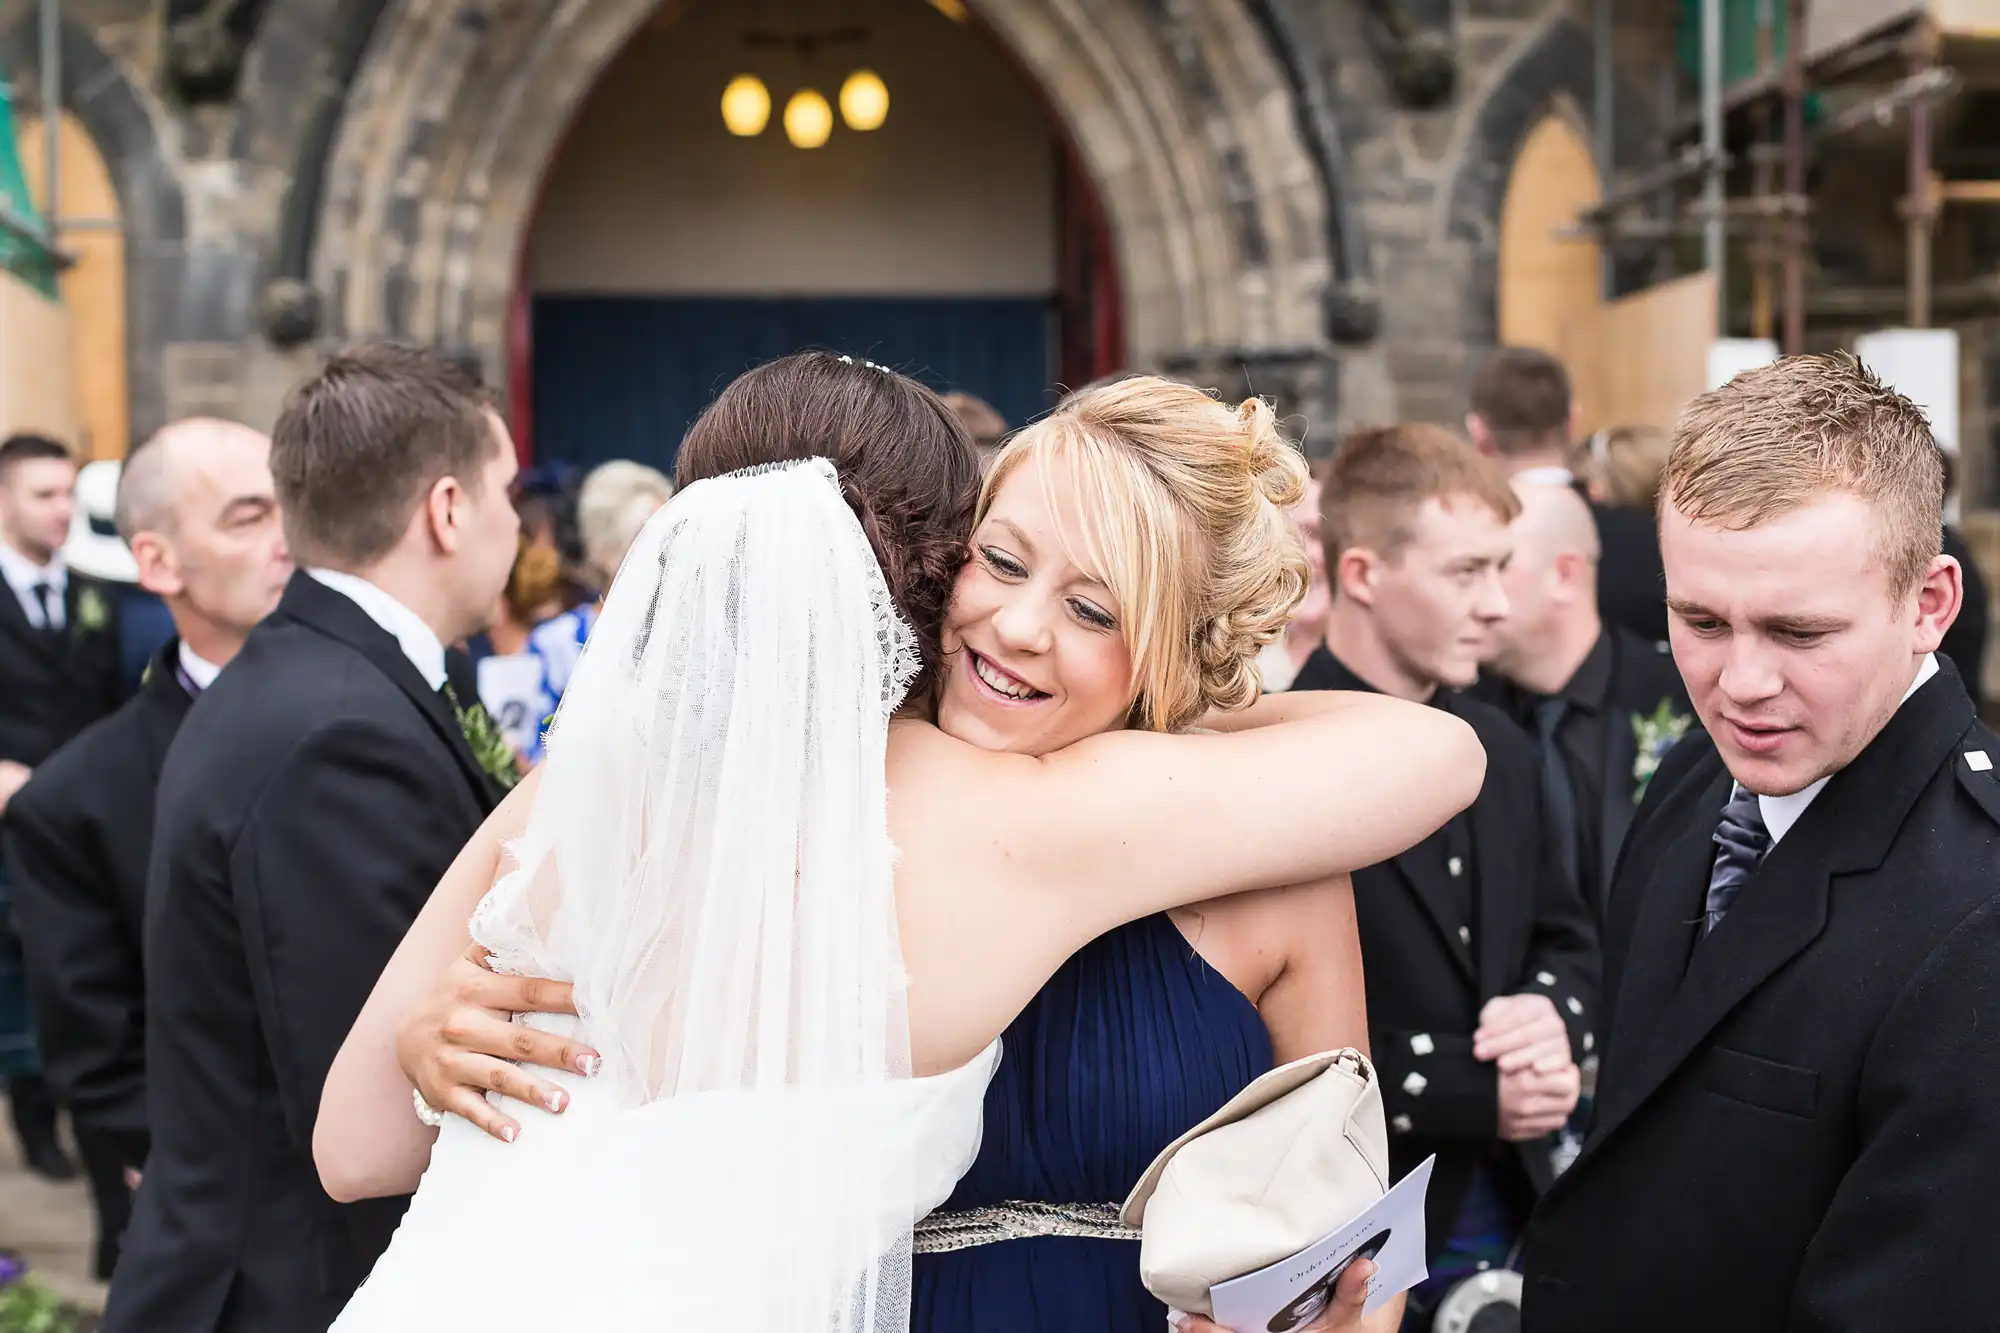 A bride and a woman in a blue dress embrace outside a church, surrounded by guests.